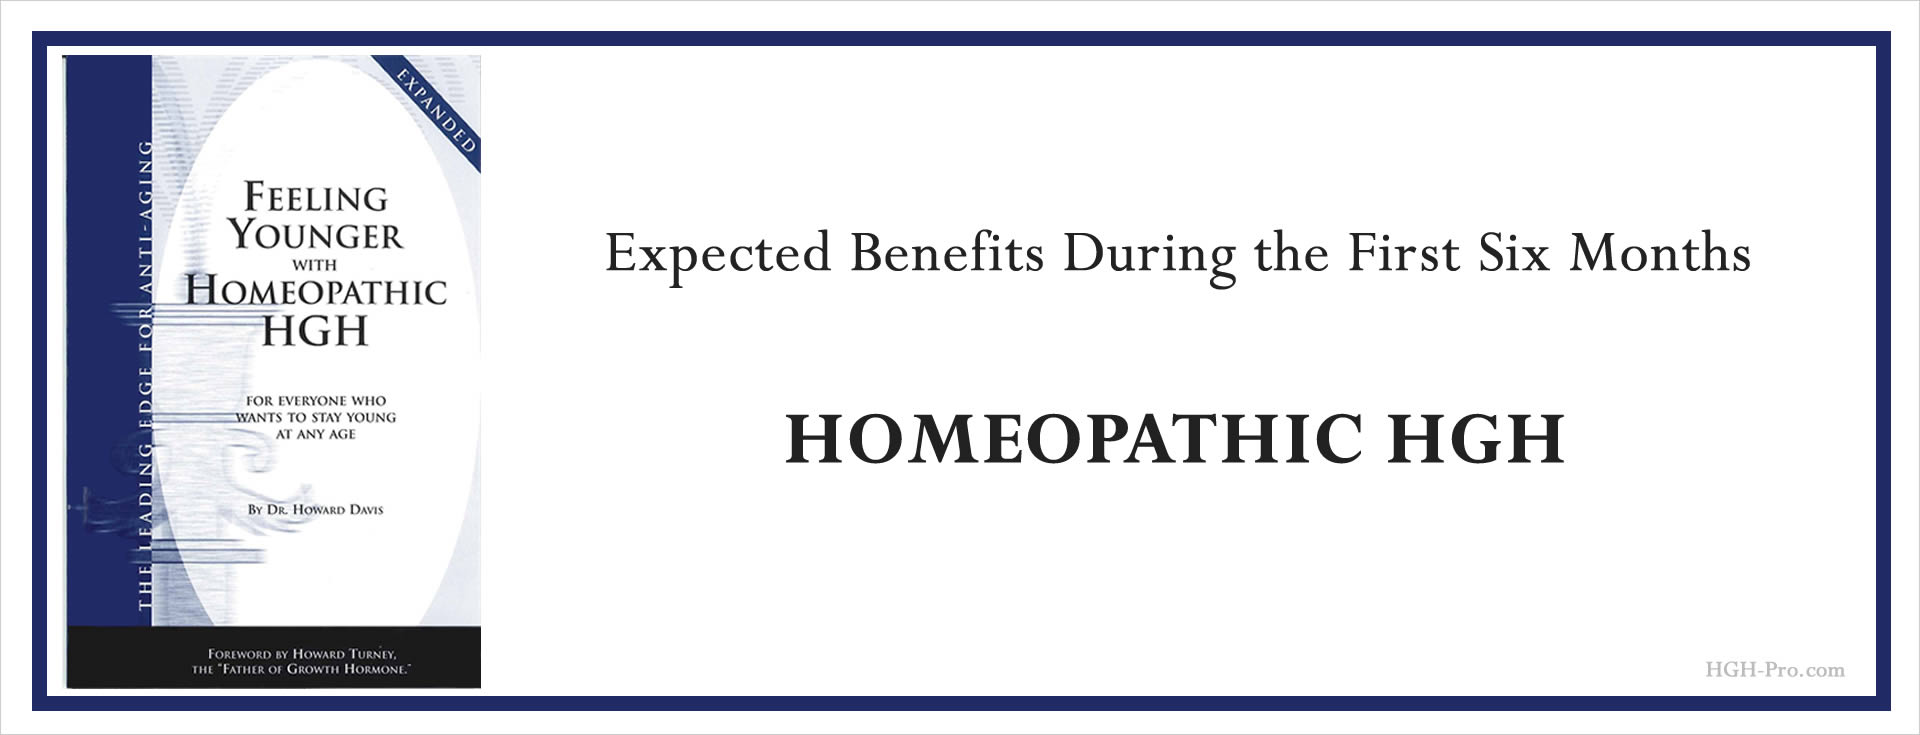 Homeopathic HGH Benefits